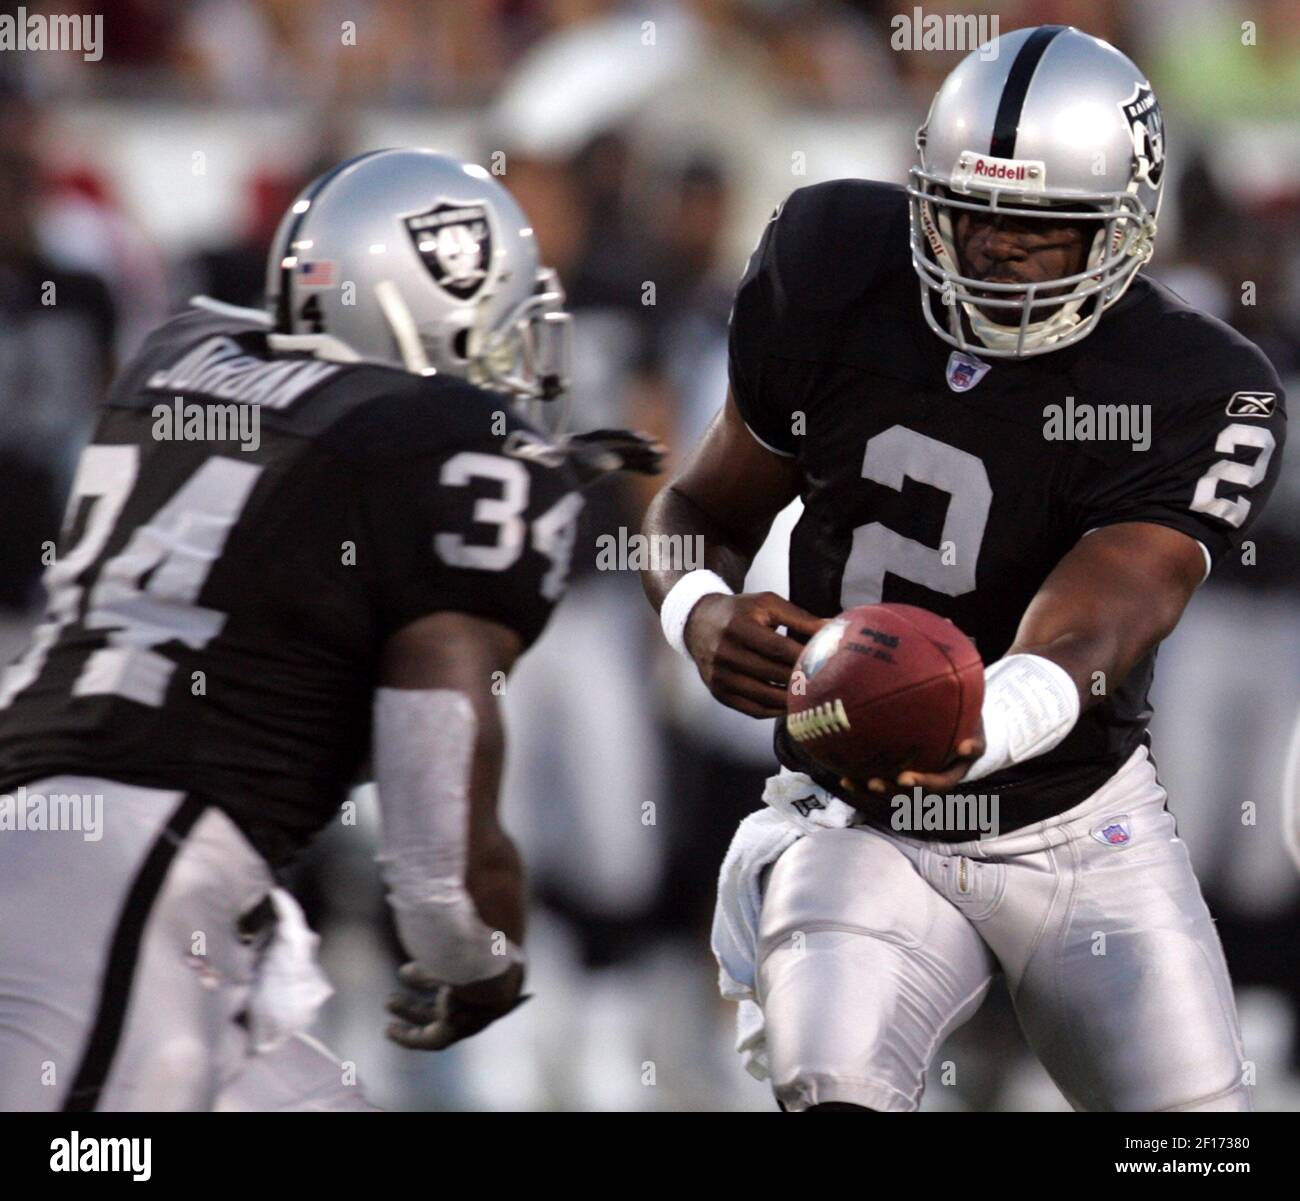 Oakland Raiders running back LaMont Jordan (34) gets the handoff from  quarterback Aaron Brooks (2) in the first quarter against the Philadelphia  Eagles in the AFC-NFC Hall of Fame Game at Fawcett